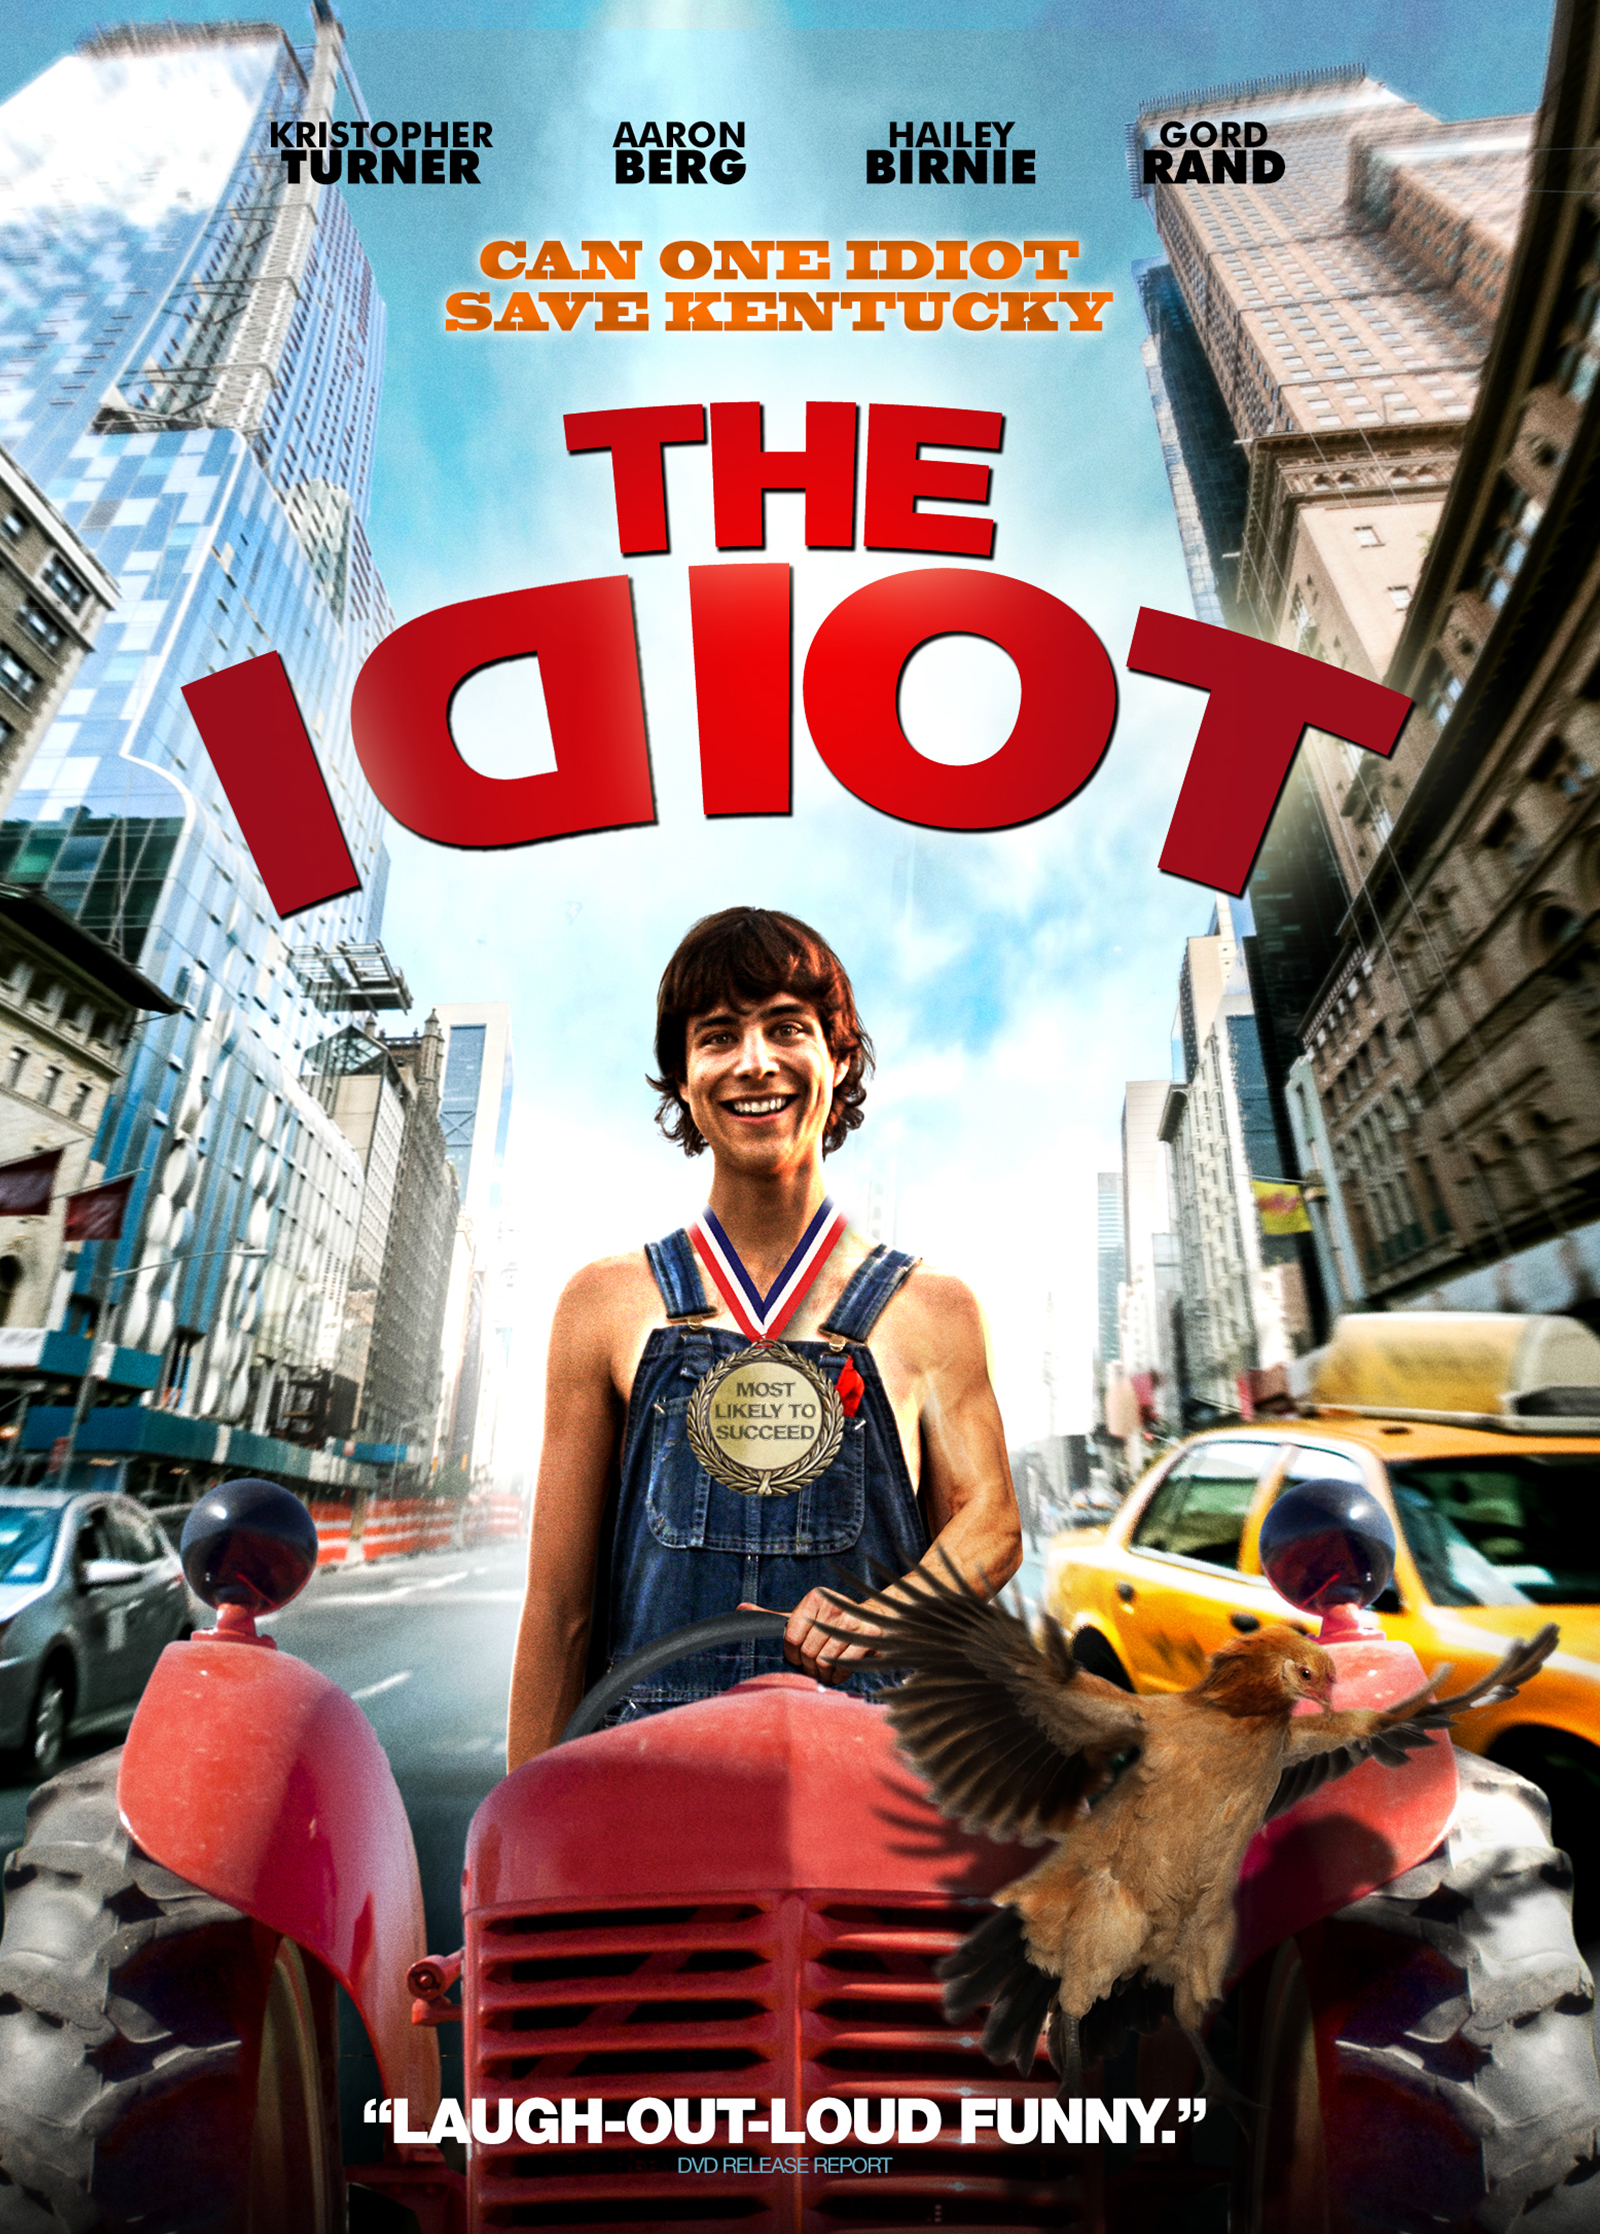 Kristopher Turner in The Idiot (2014)